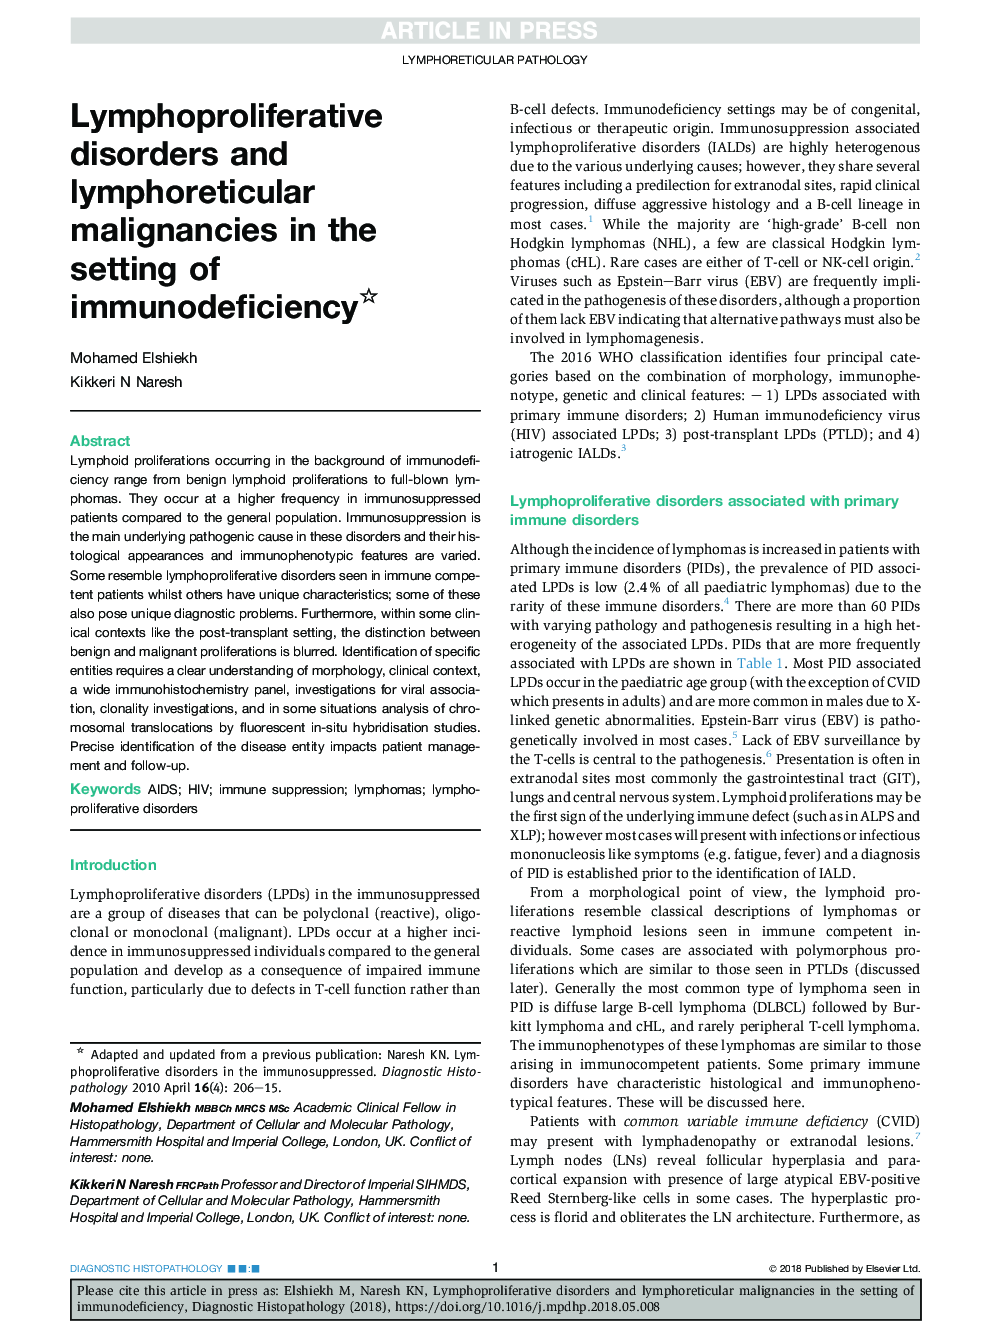 Lymphoproliferative disorders and lymphoreticular malignancies in the setting of immunodeficiency